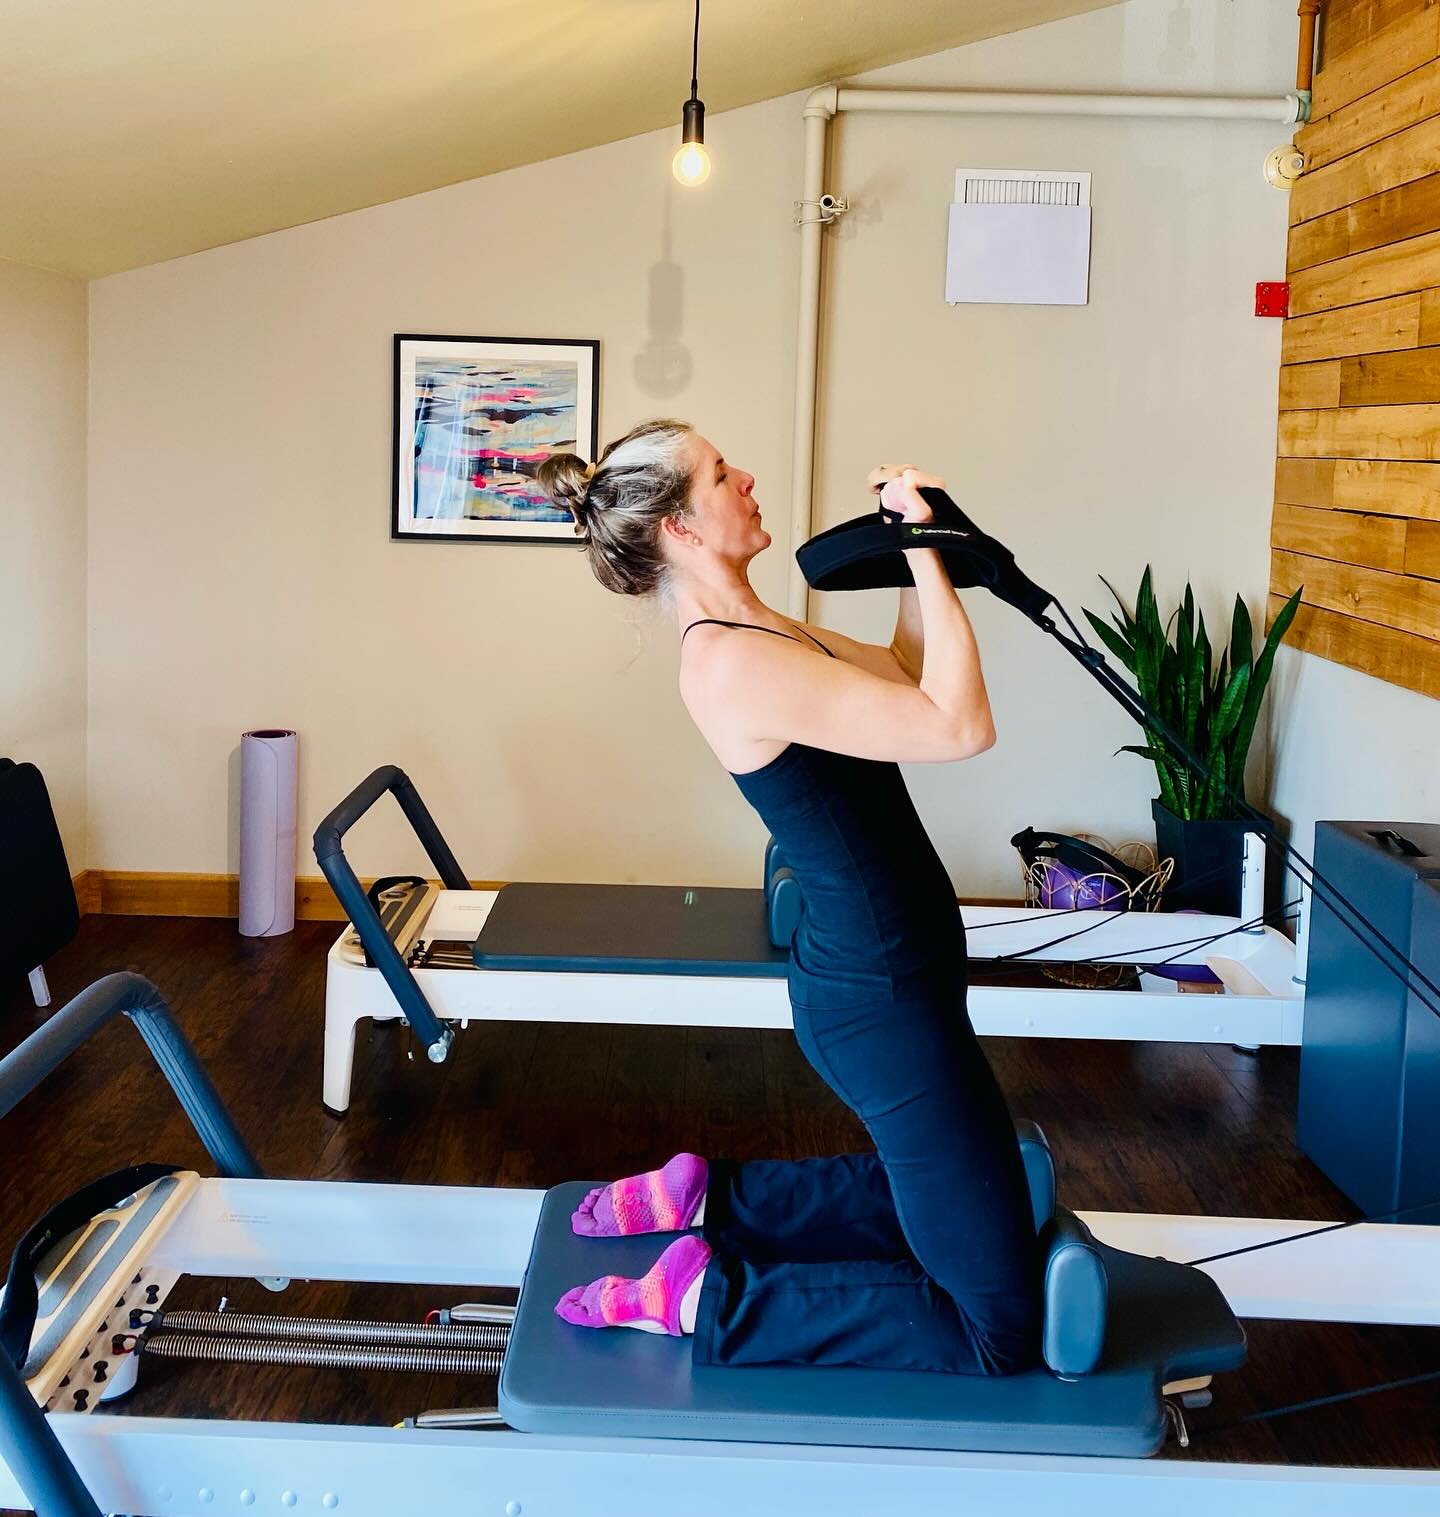 My client rocked this upper body, core exercise! Gorgeous. #pilateslife